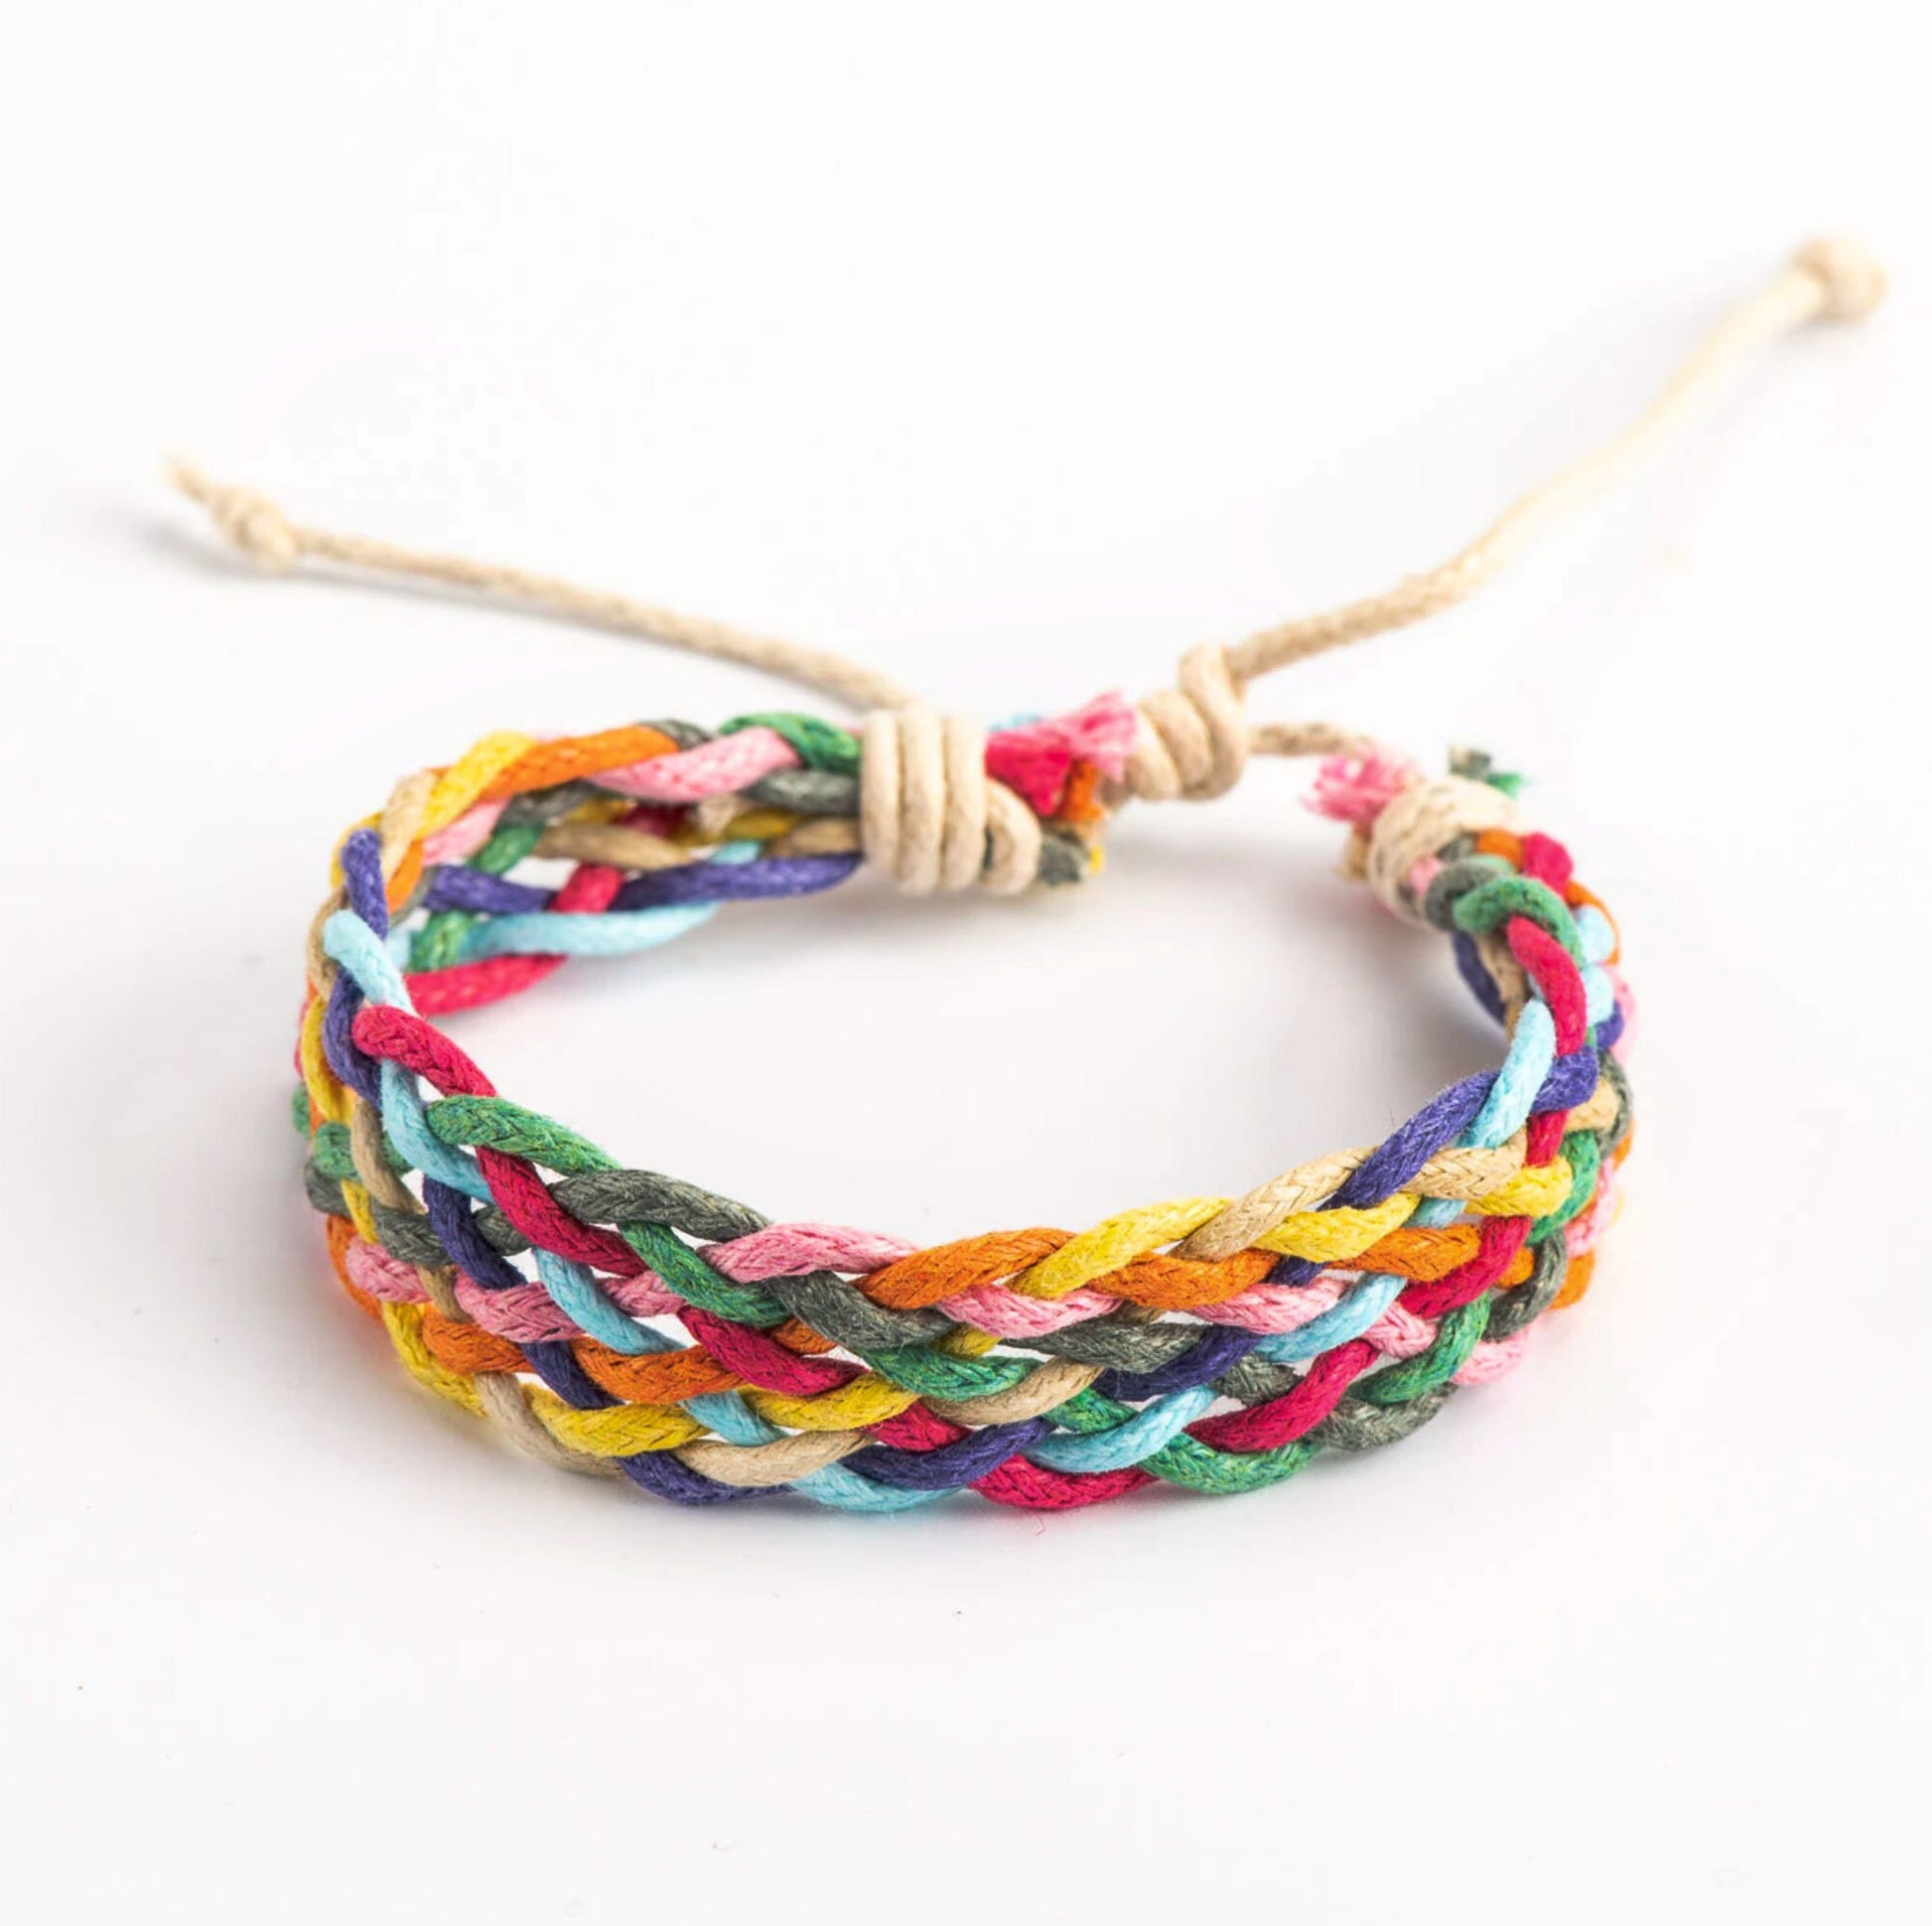 Colorful Braided Wristband Bracelet Adjustable Woven Cotton Rope Young Girls Gift Spring Summer Fashion Casual Outfit Mexico Colors Pulsera